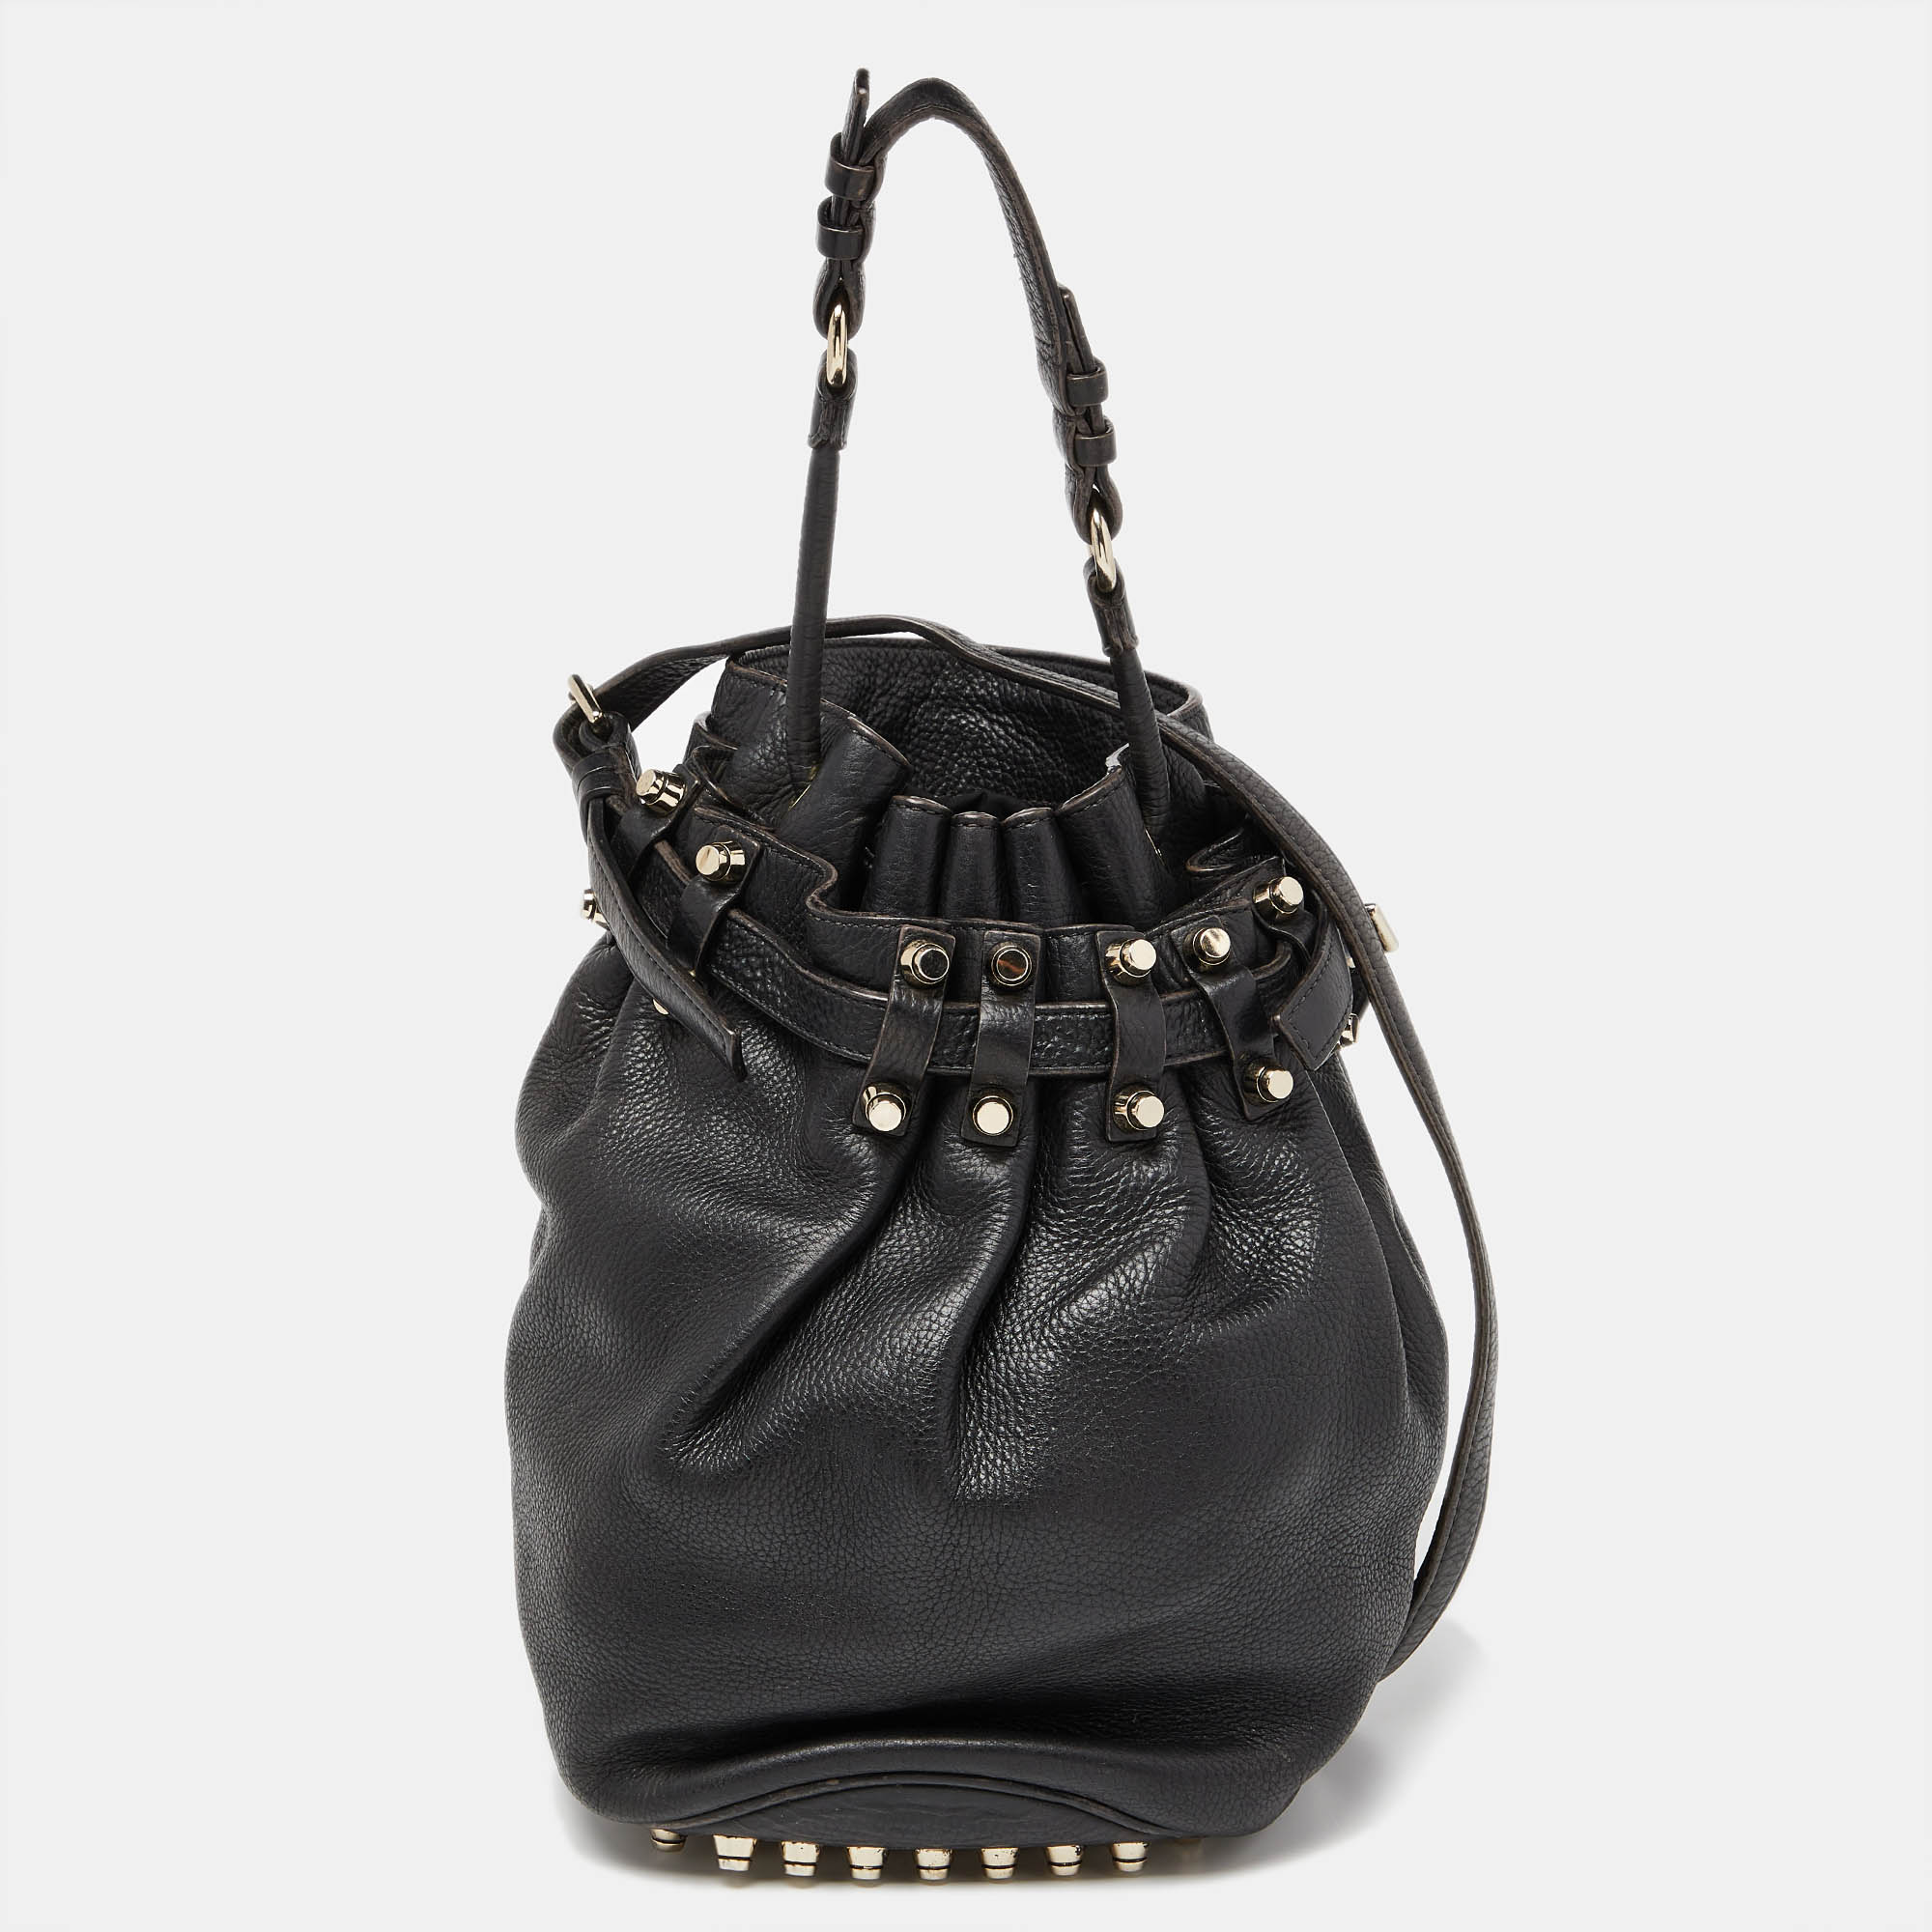 Pre-owned Alexander Wang Black Textured Leather Diego Bucket Bag